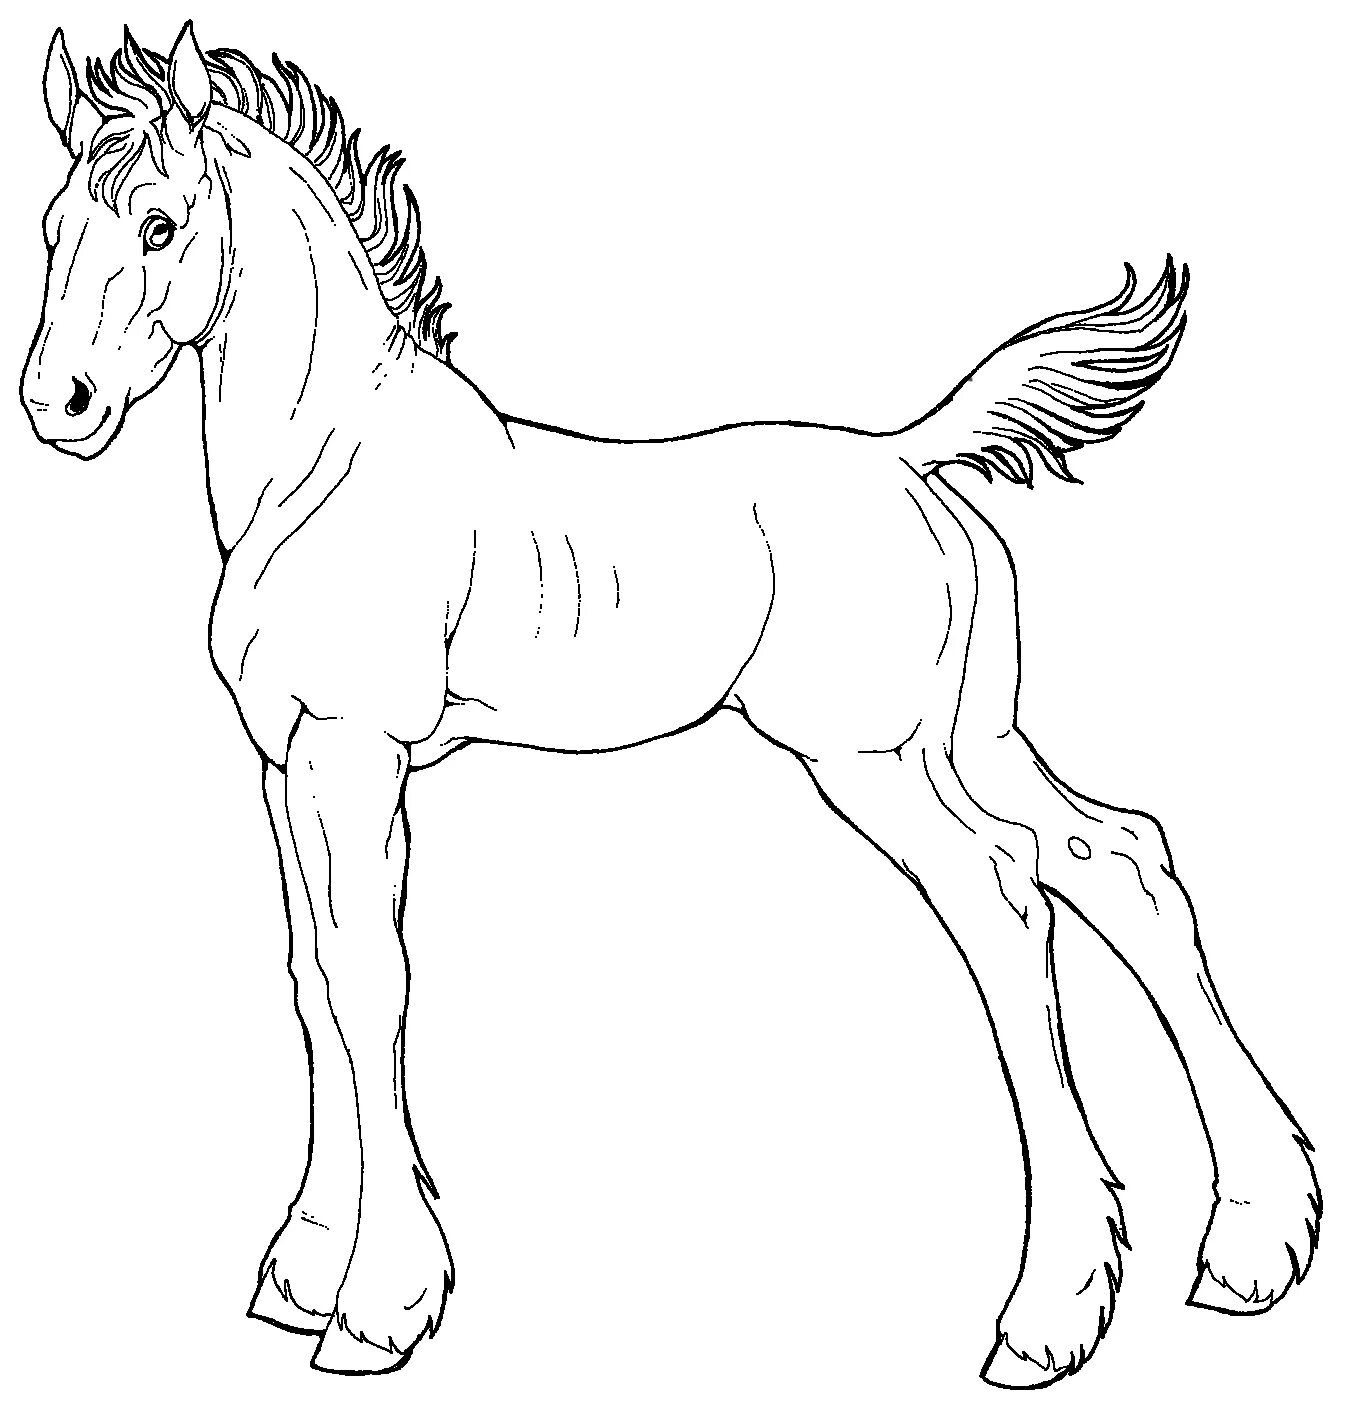 Royal foal coloring page for kids